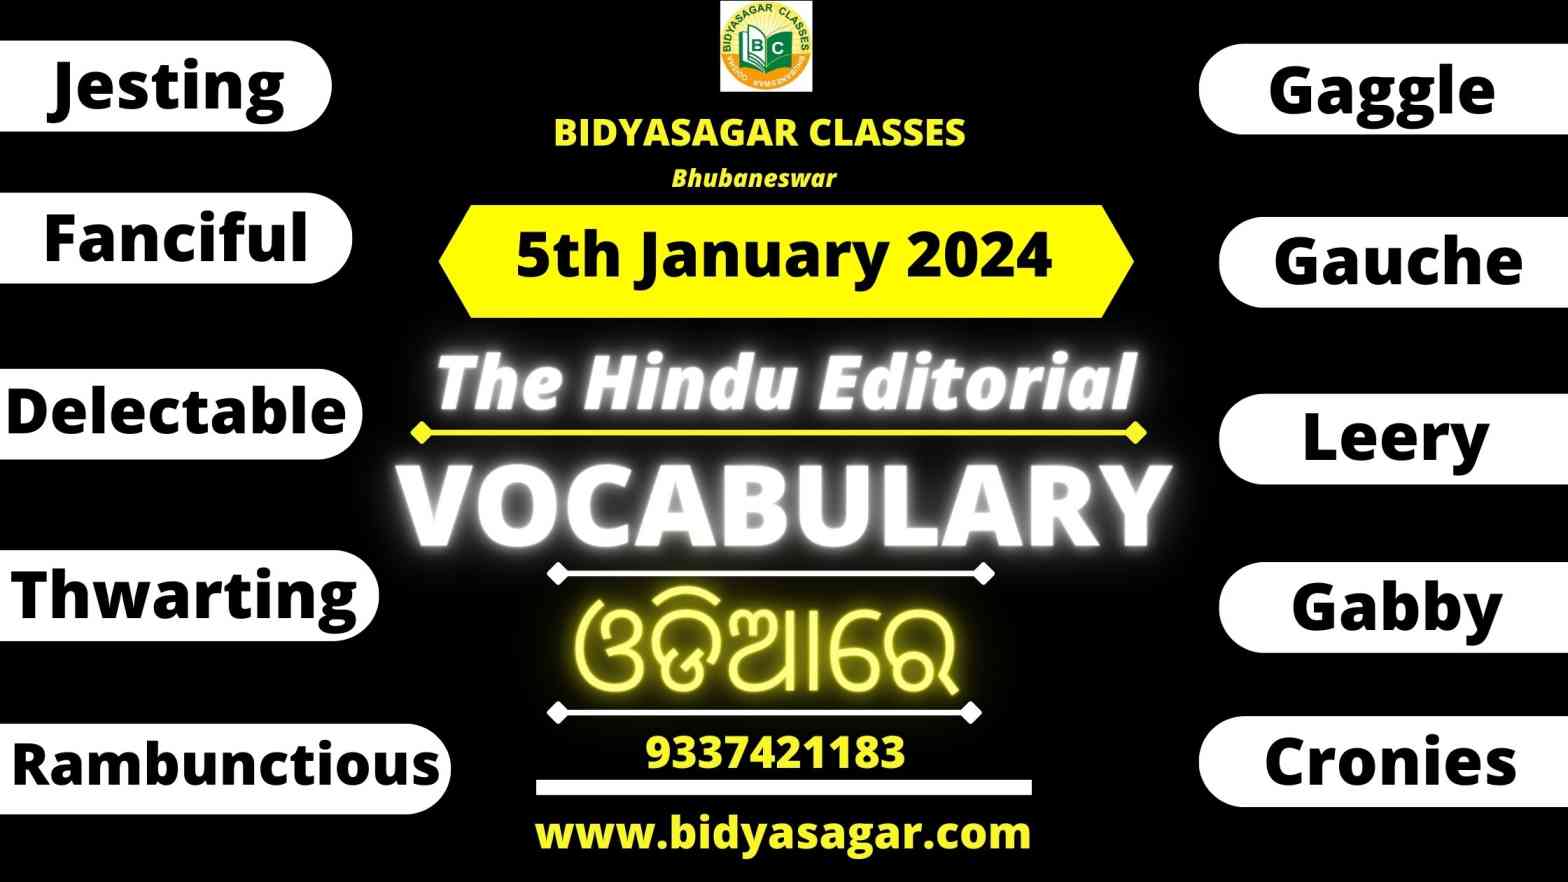 The Hindu Editorial Vocabulary of 5th January 2024